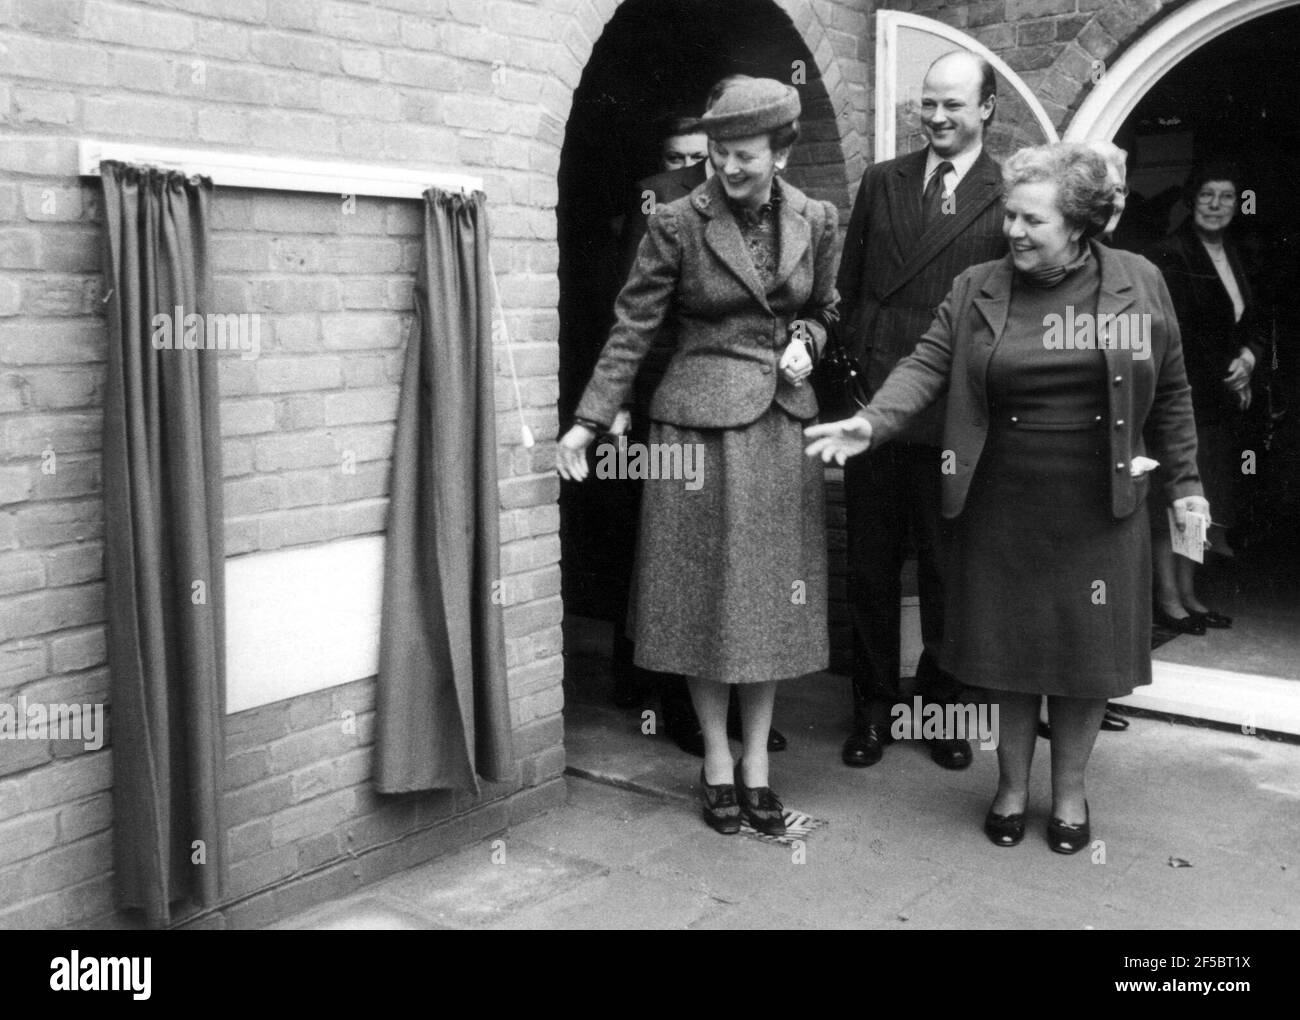 HER MAJESTY THE QUEEN OF DENMARK, QUEEN MARGARETHE II UNVEILS THE FOUNDATION STONE OF THE NEW MUSIC ROOM AT NORTH FORELAND LODGE SHERFIELD ON LODDEN, ENGLAND WATCHED BY HEADMISTRESS MISS ROSEMARY IRVINE. PIC MIKE WALKER, M. AND Y. PORTSMOUTH 1983 Stock Photo